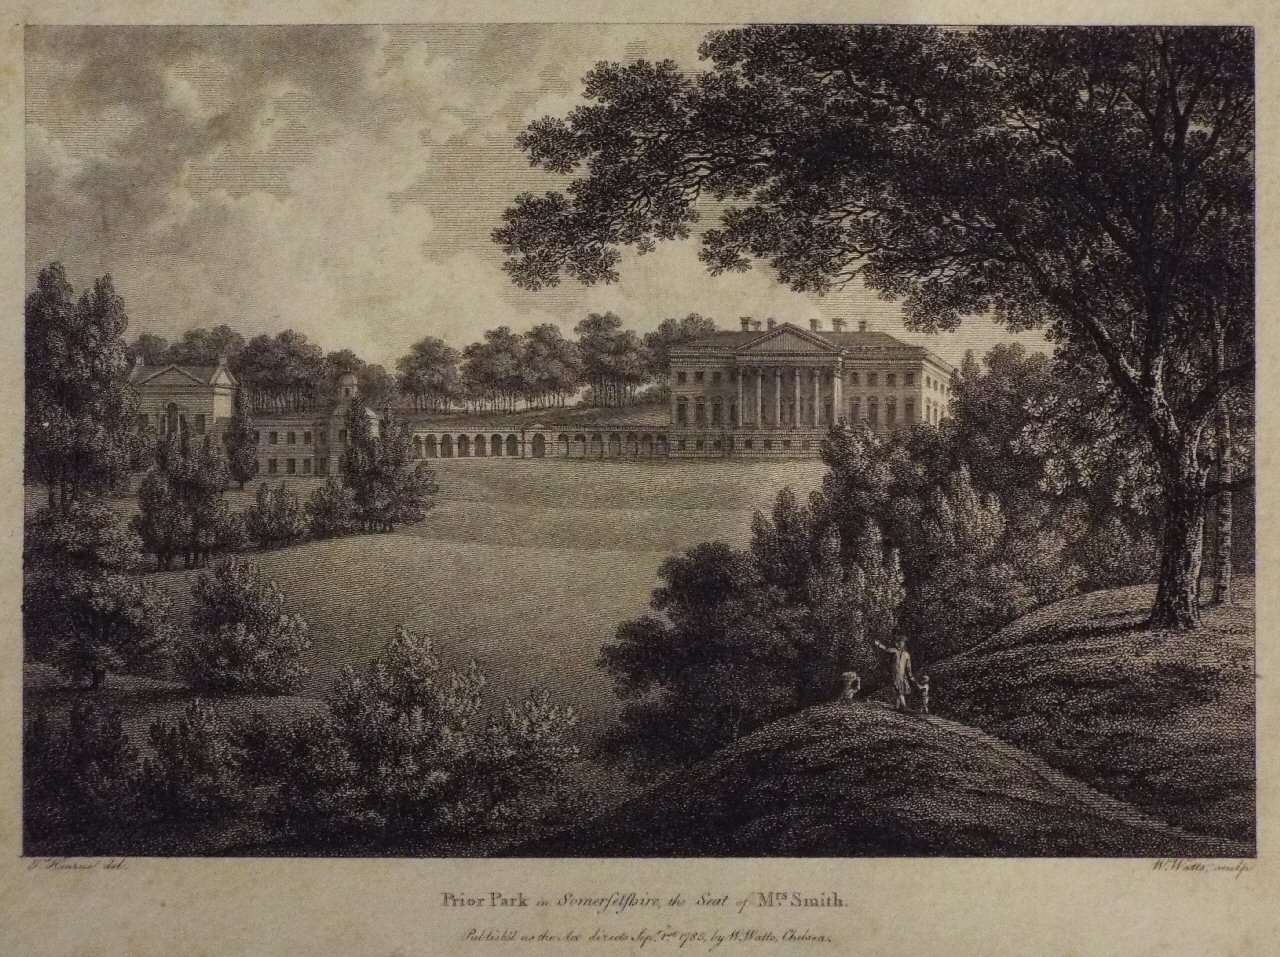 Print - Prior Park in Somersetshire, the Seat of Mrs. Smith. - Watts